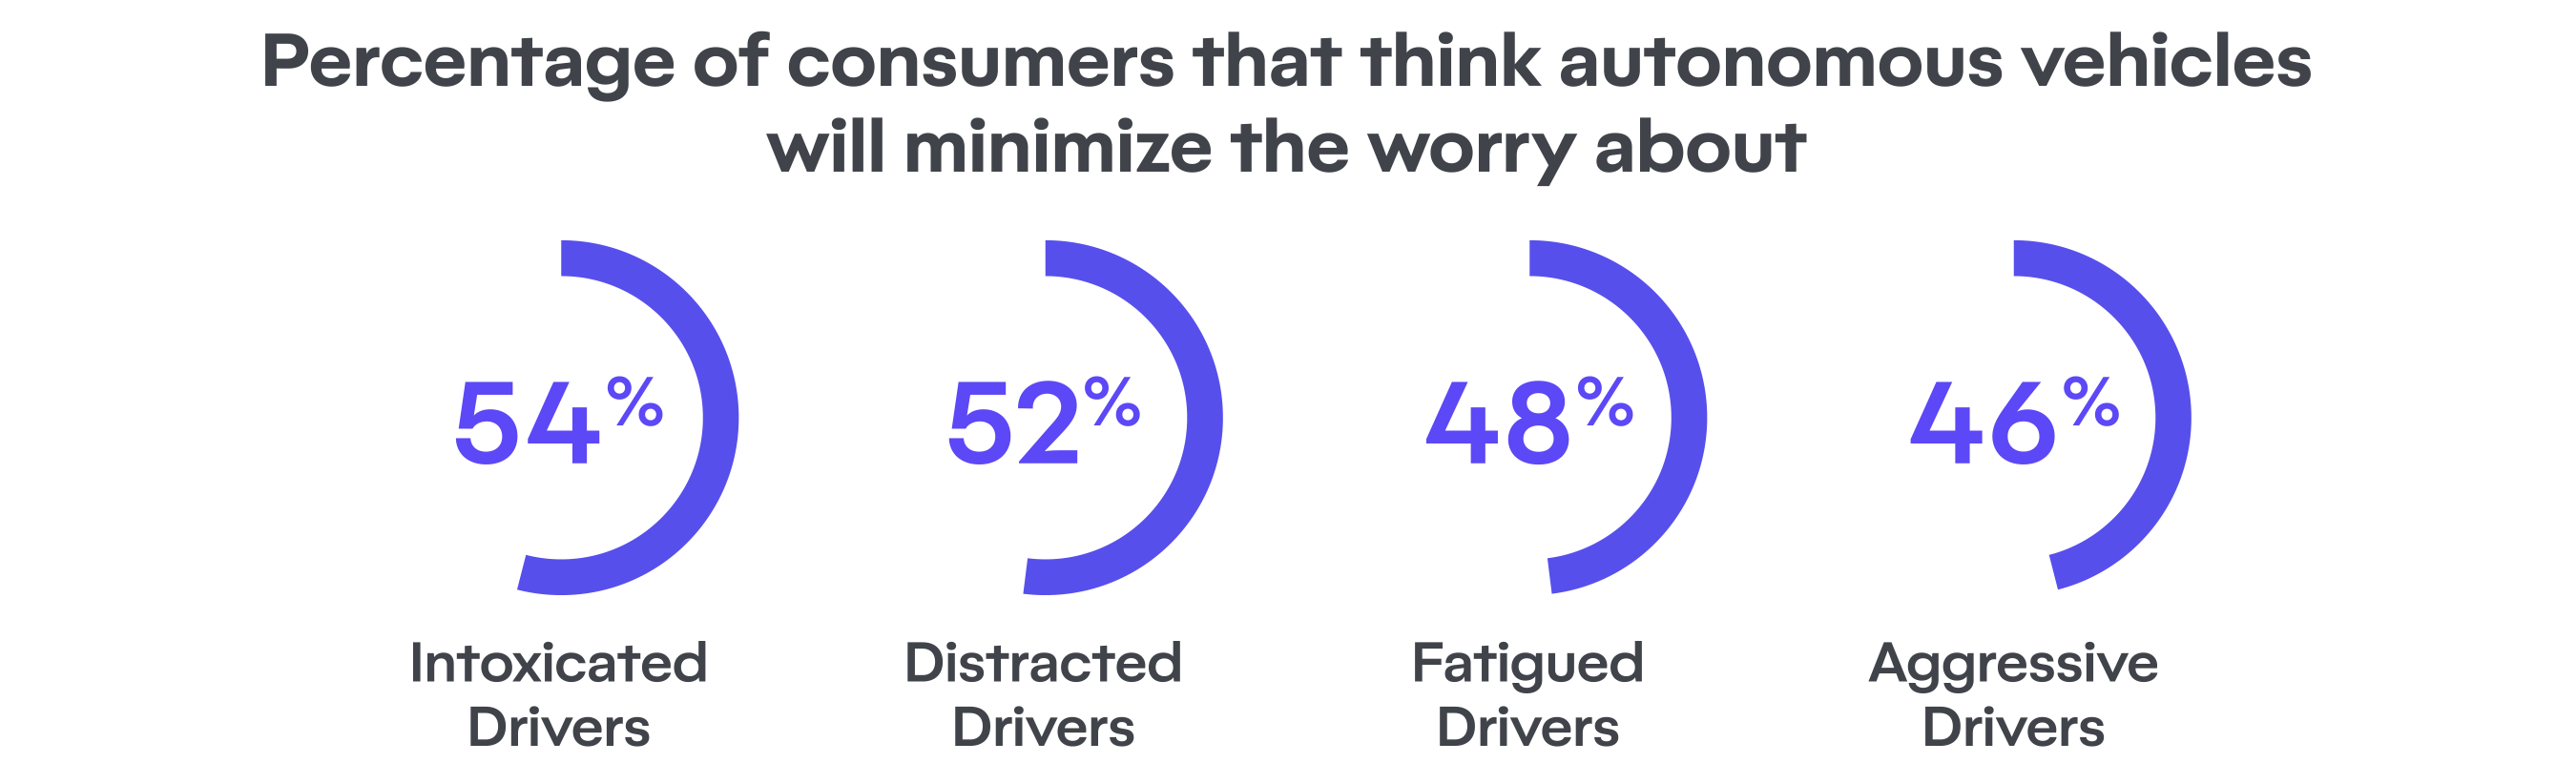 4 graphs showing the percentage of consumers that think autonomous vehicles will minimize the worry about: Intoxicated Drivers 54%, Distracted Drivers 54%, Fatigued Drivers 48%, Aggressive Drivers 46%